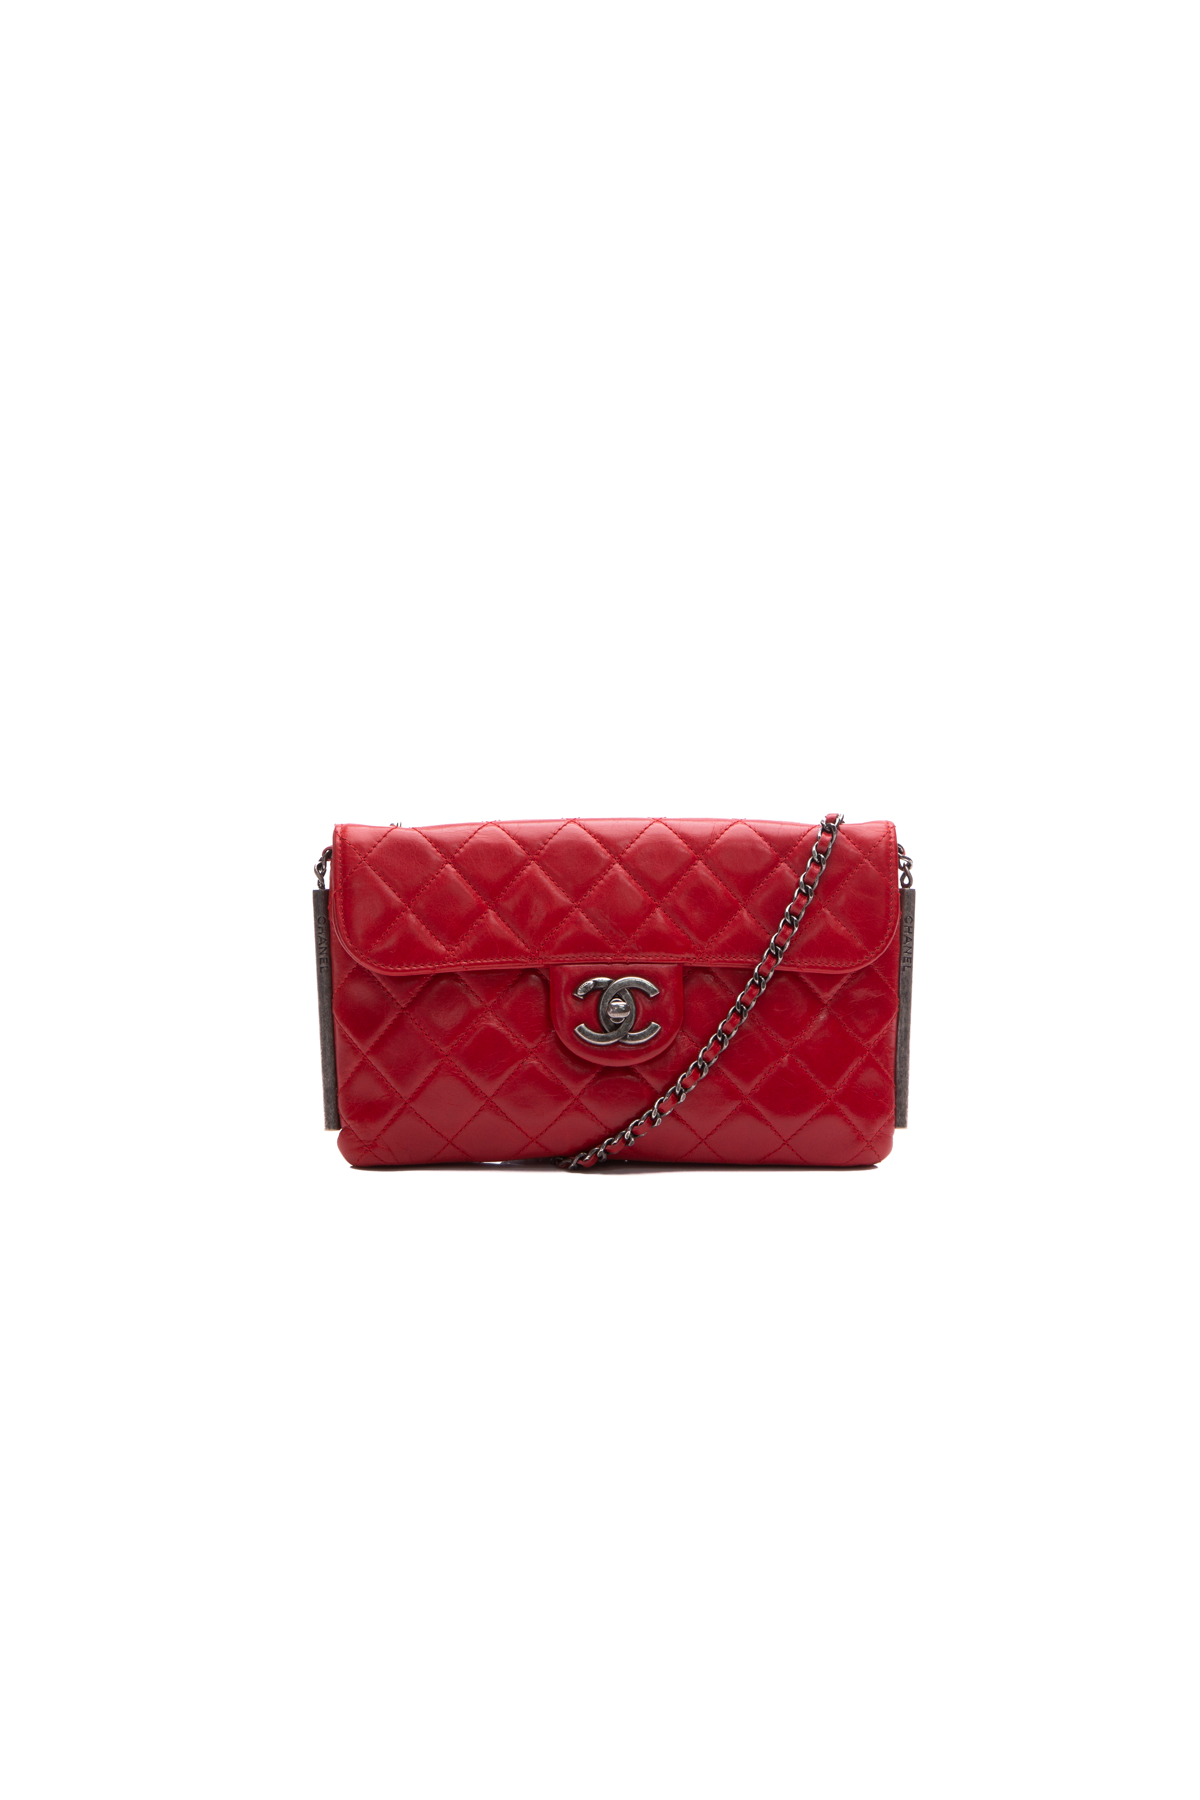 Chanel Quilted Flap Crossbody Bag - Couture USA